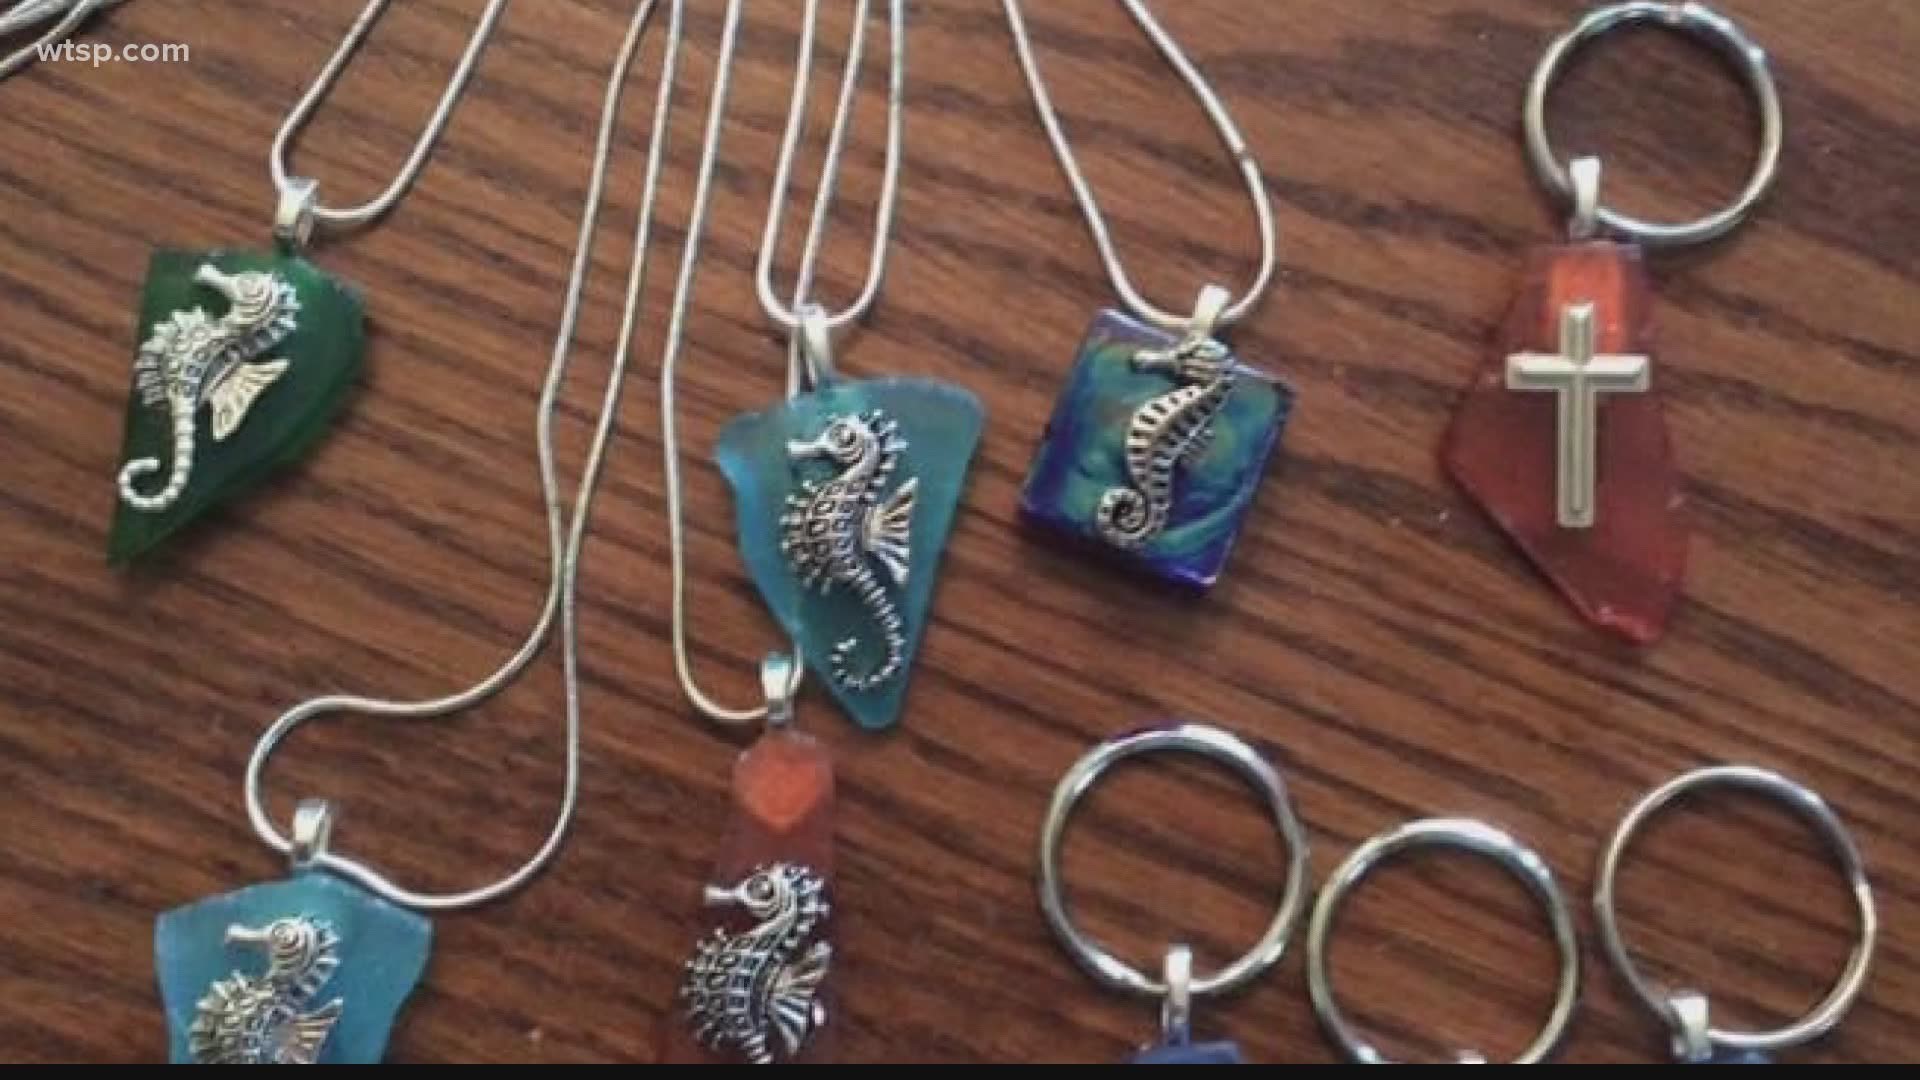 Trina Bertoldi's jewelry is offsetting the rising cost of shipping donated clothing to needy mothers during the COVID-19 pandemic.